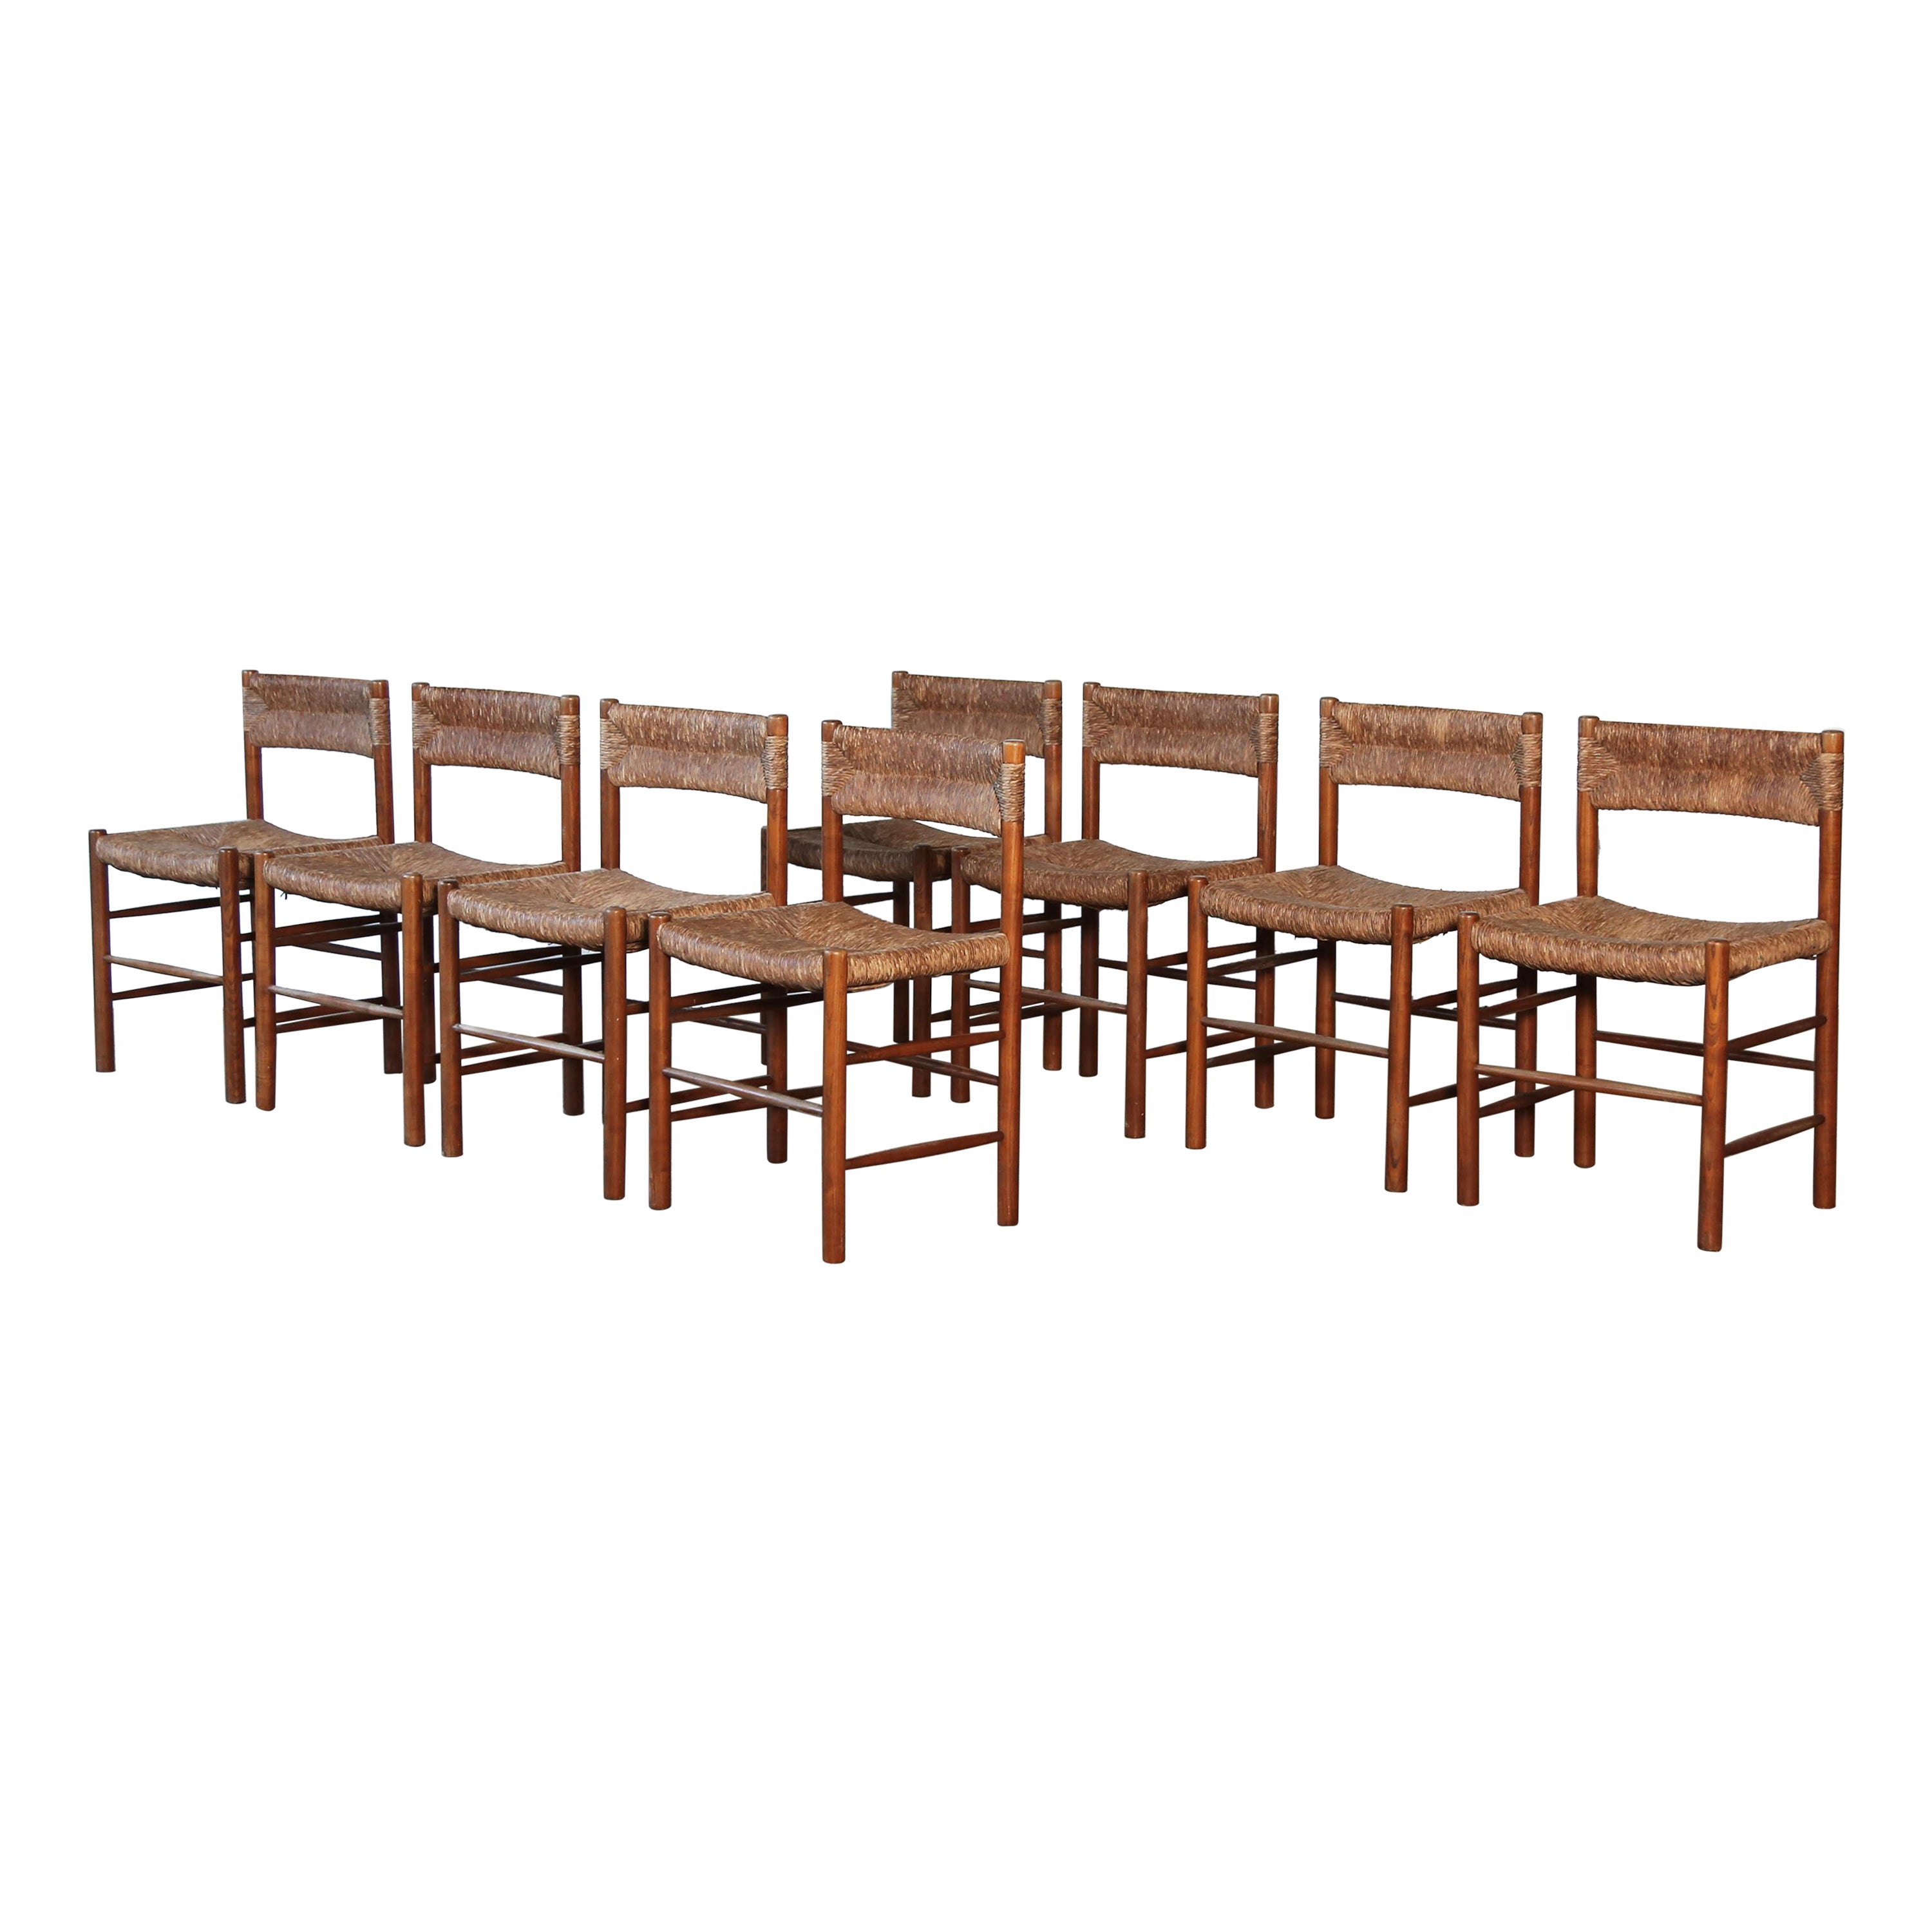 Set of 8 Charlotte Perriand / Robert Sentou Dordogne Chairs, France, 1960s For Sale